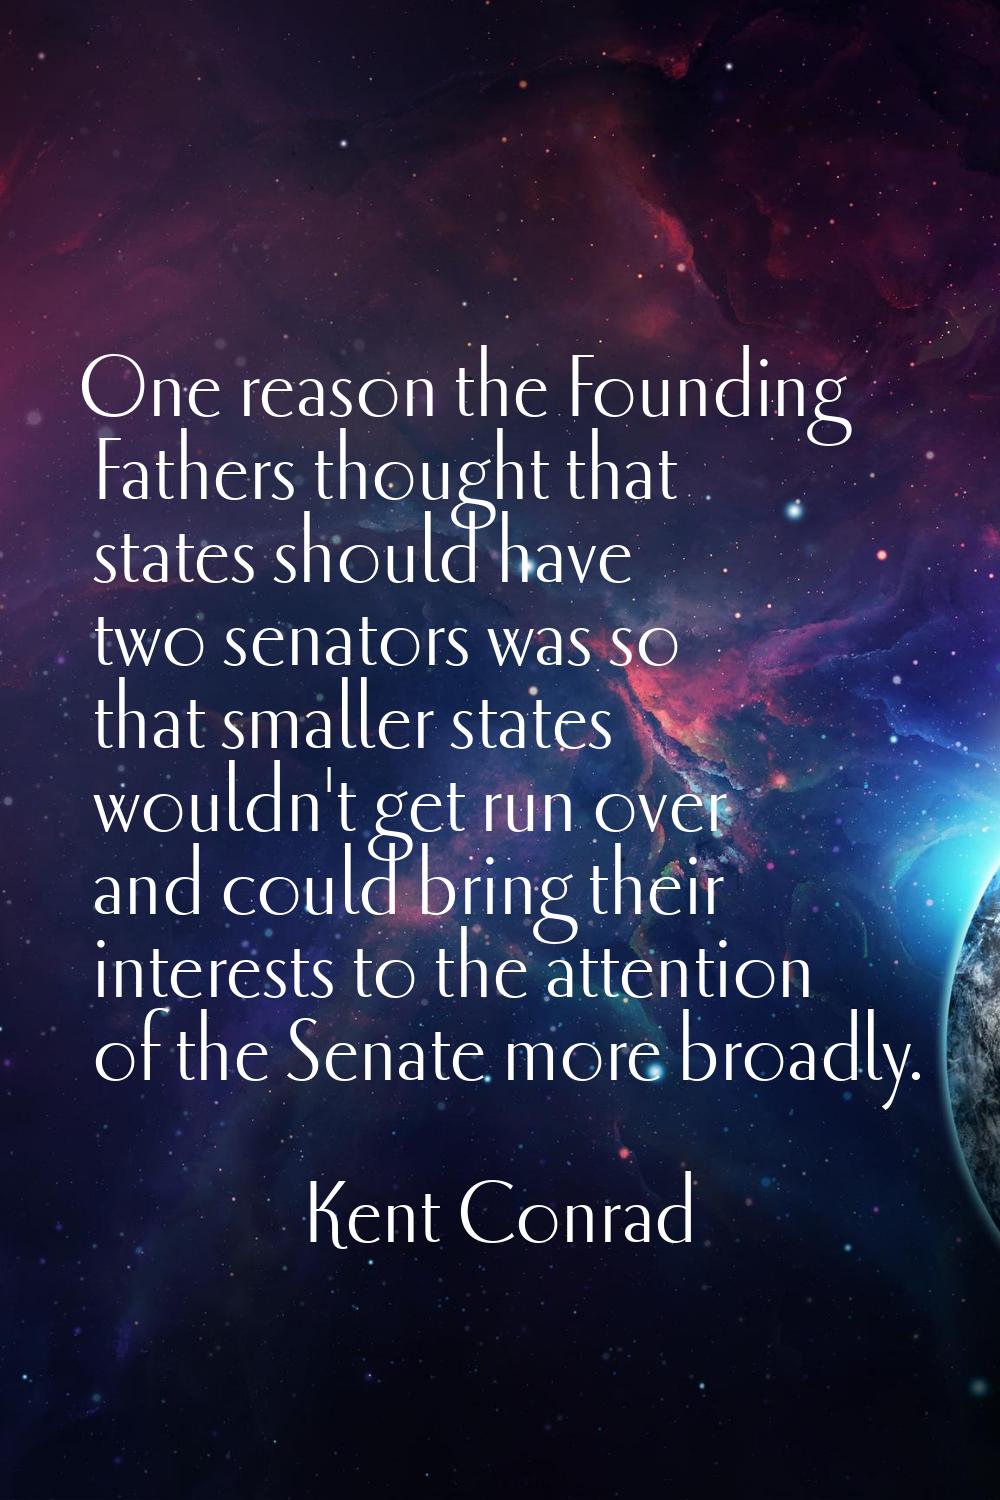 One reason the Founding Fathers thought that states should have two senators was so that smaller st